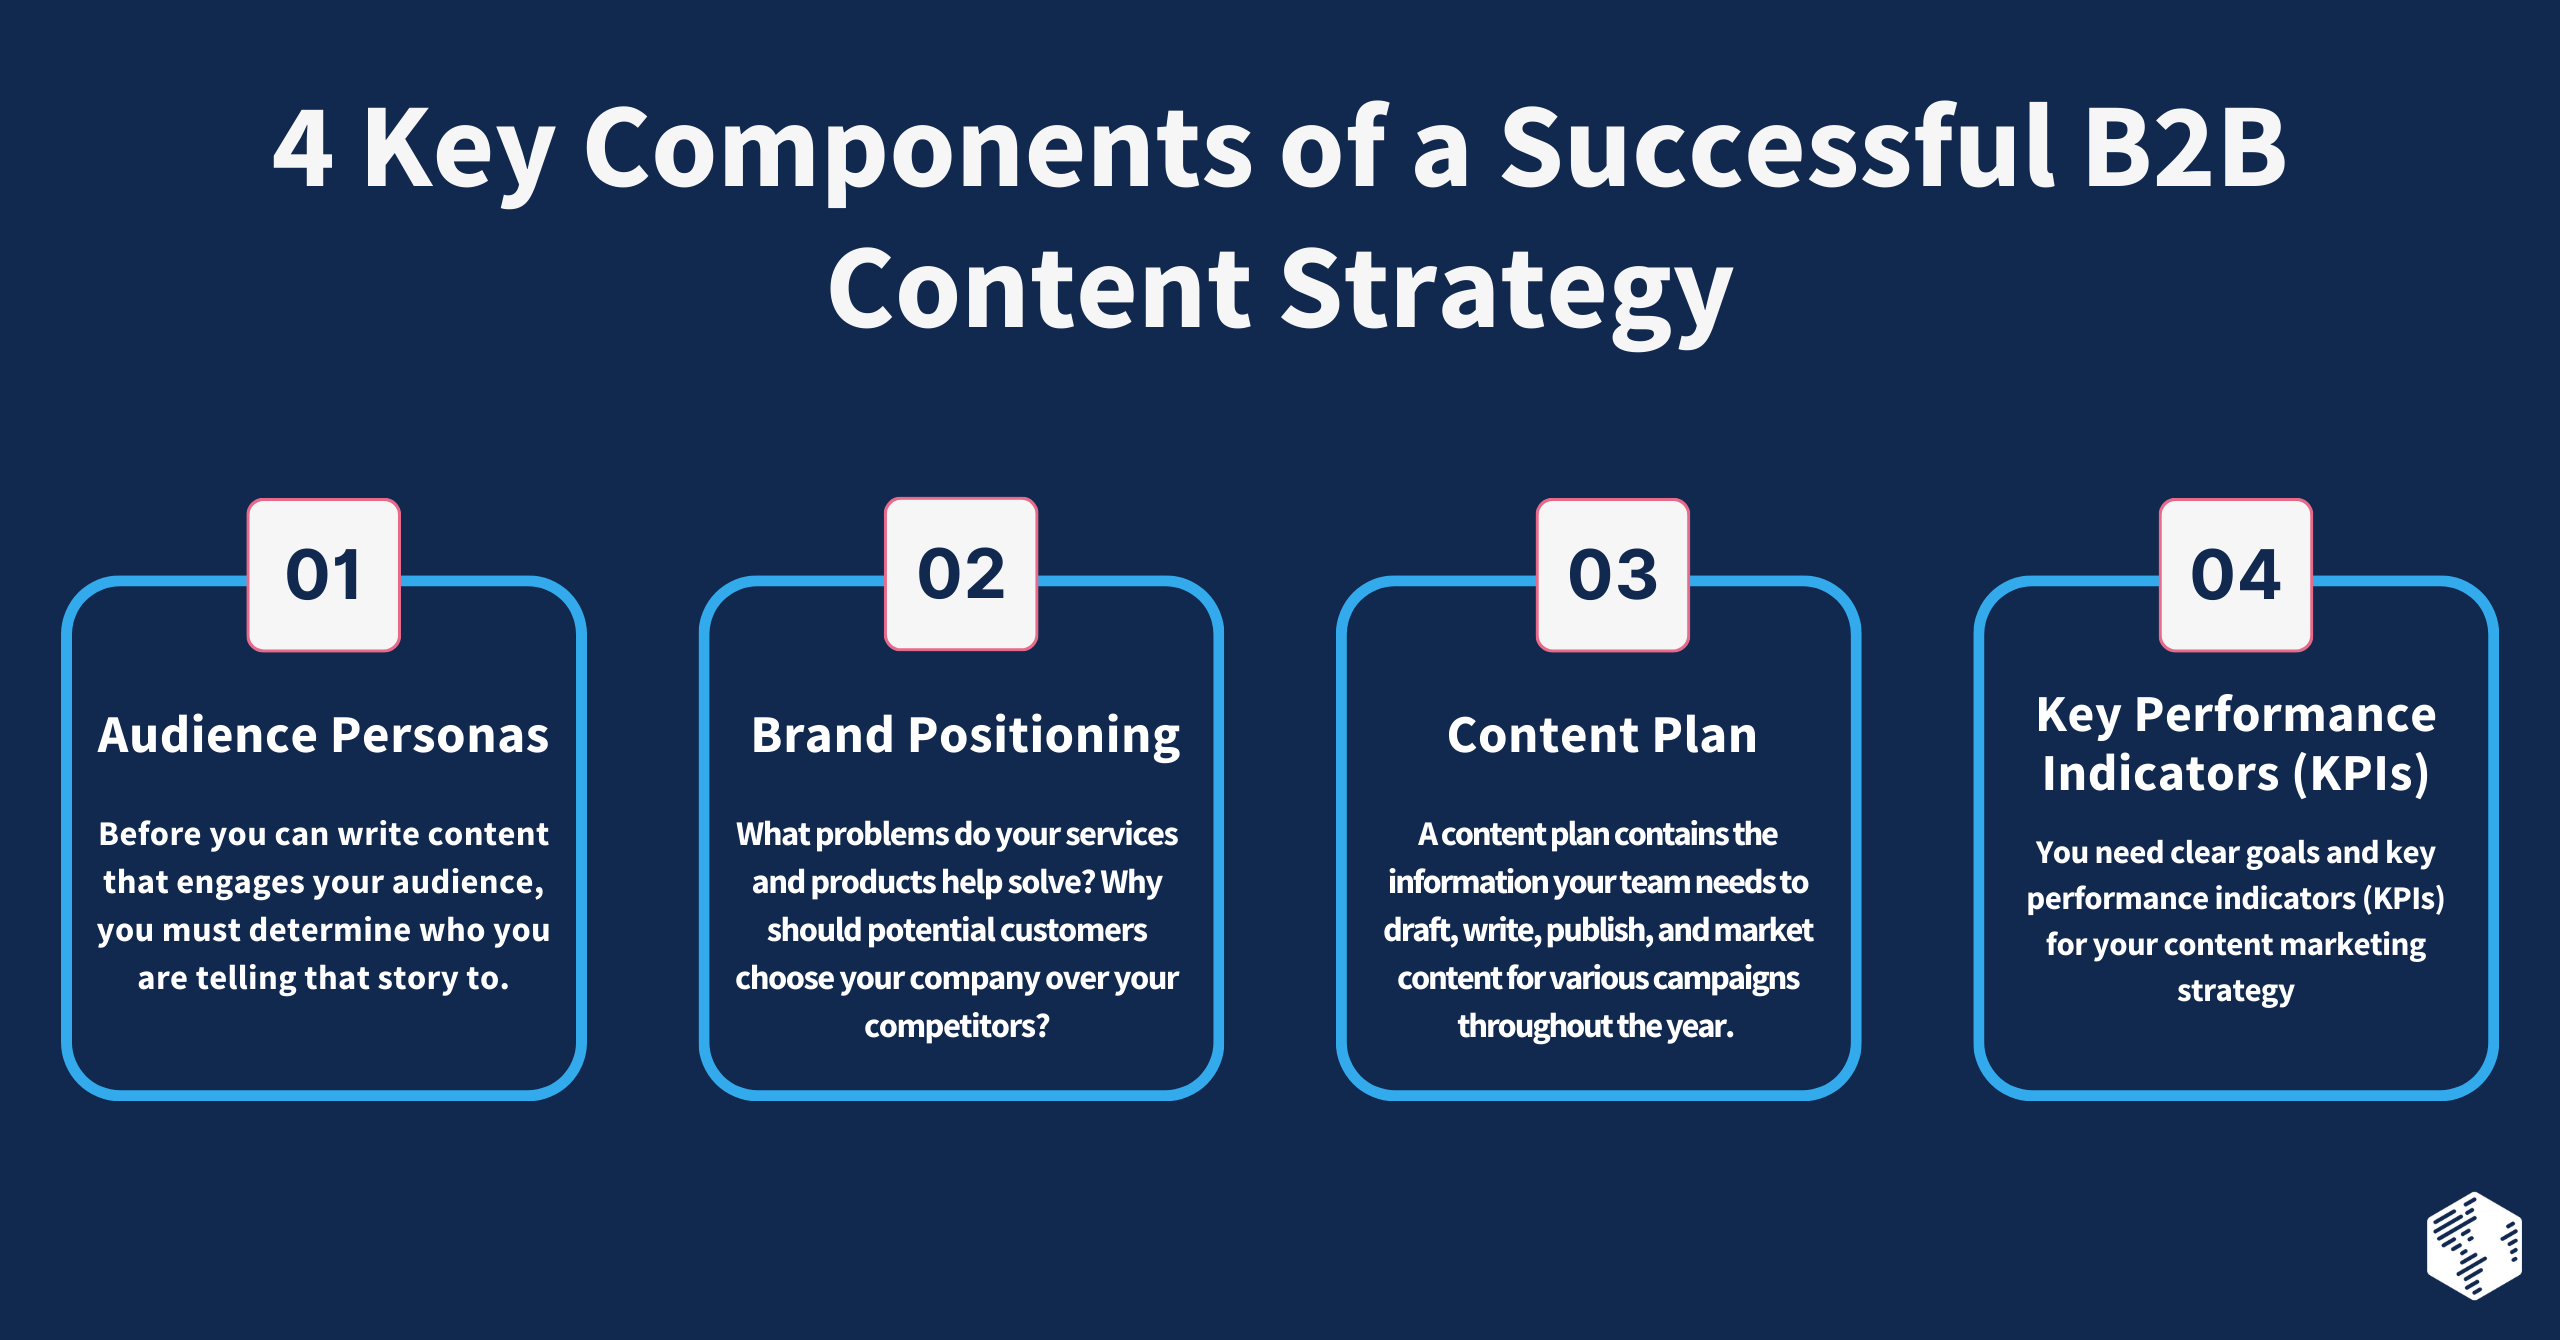 Components of B2B Content Strategy